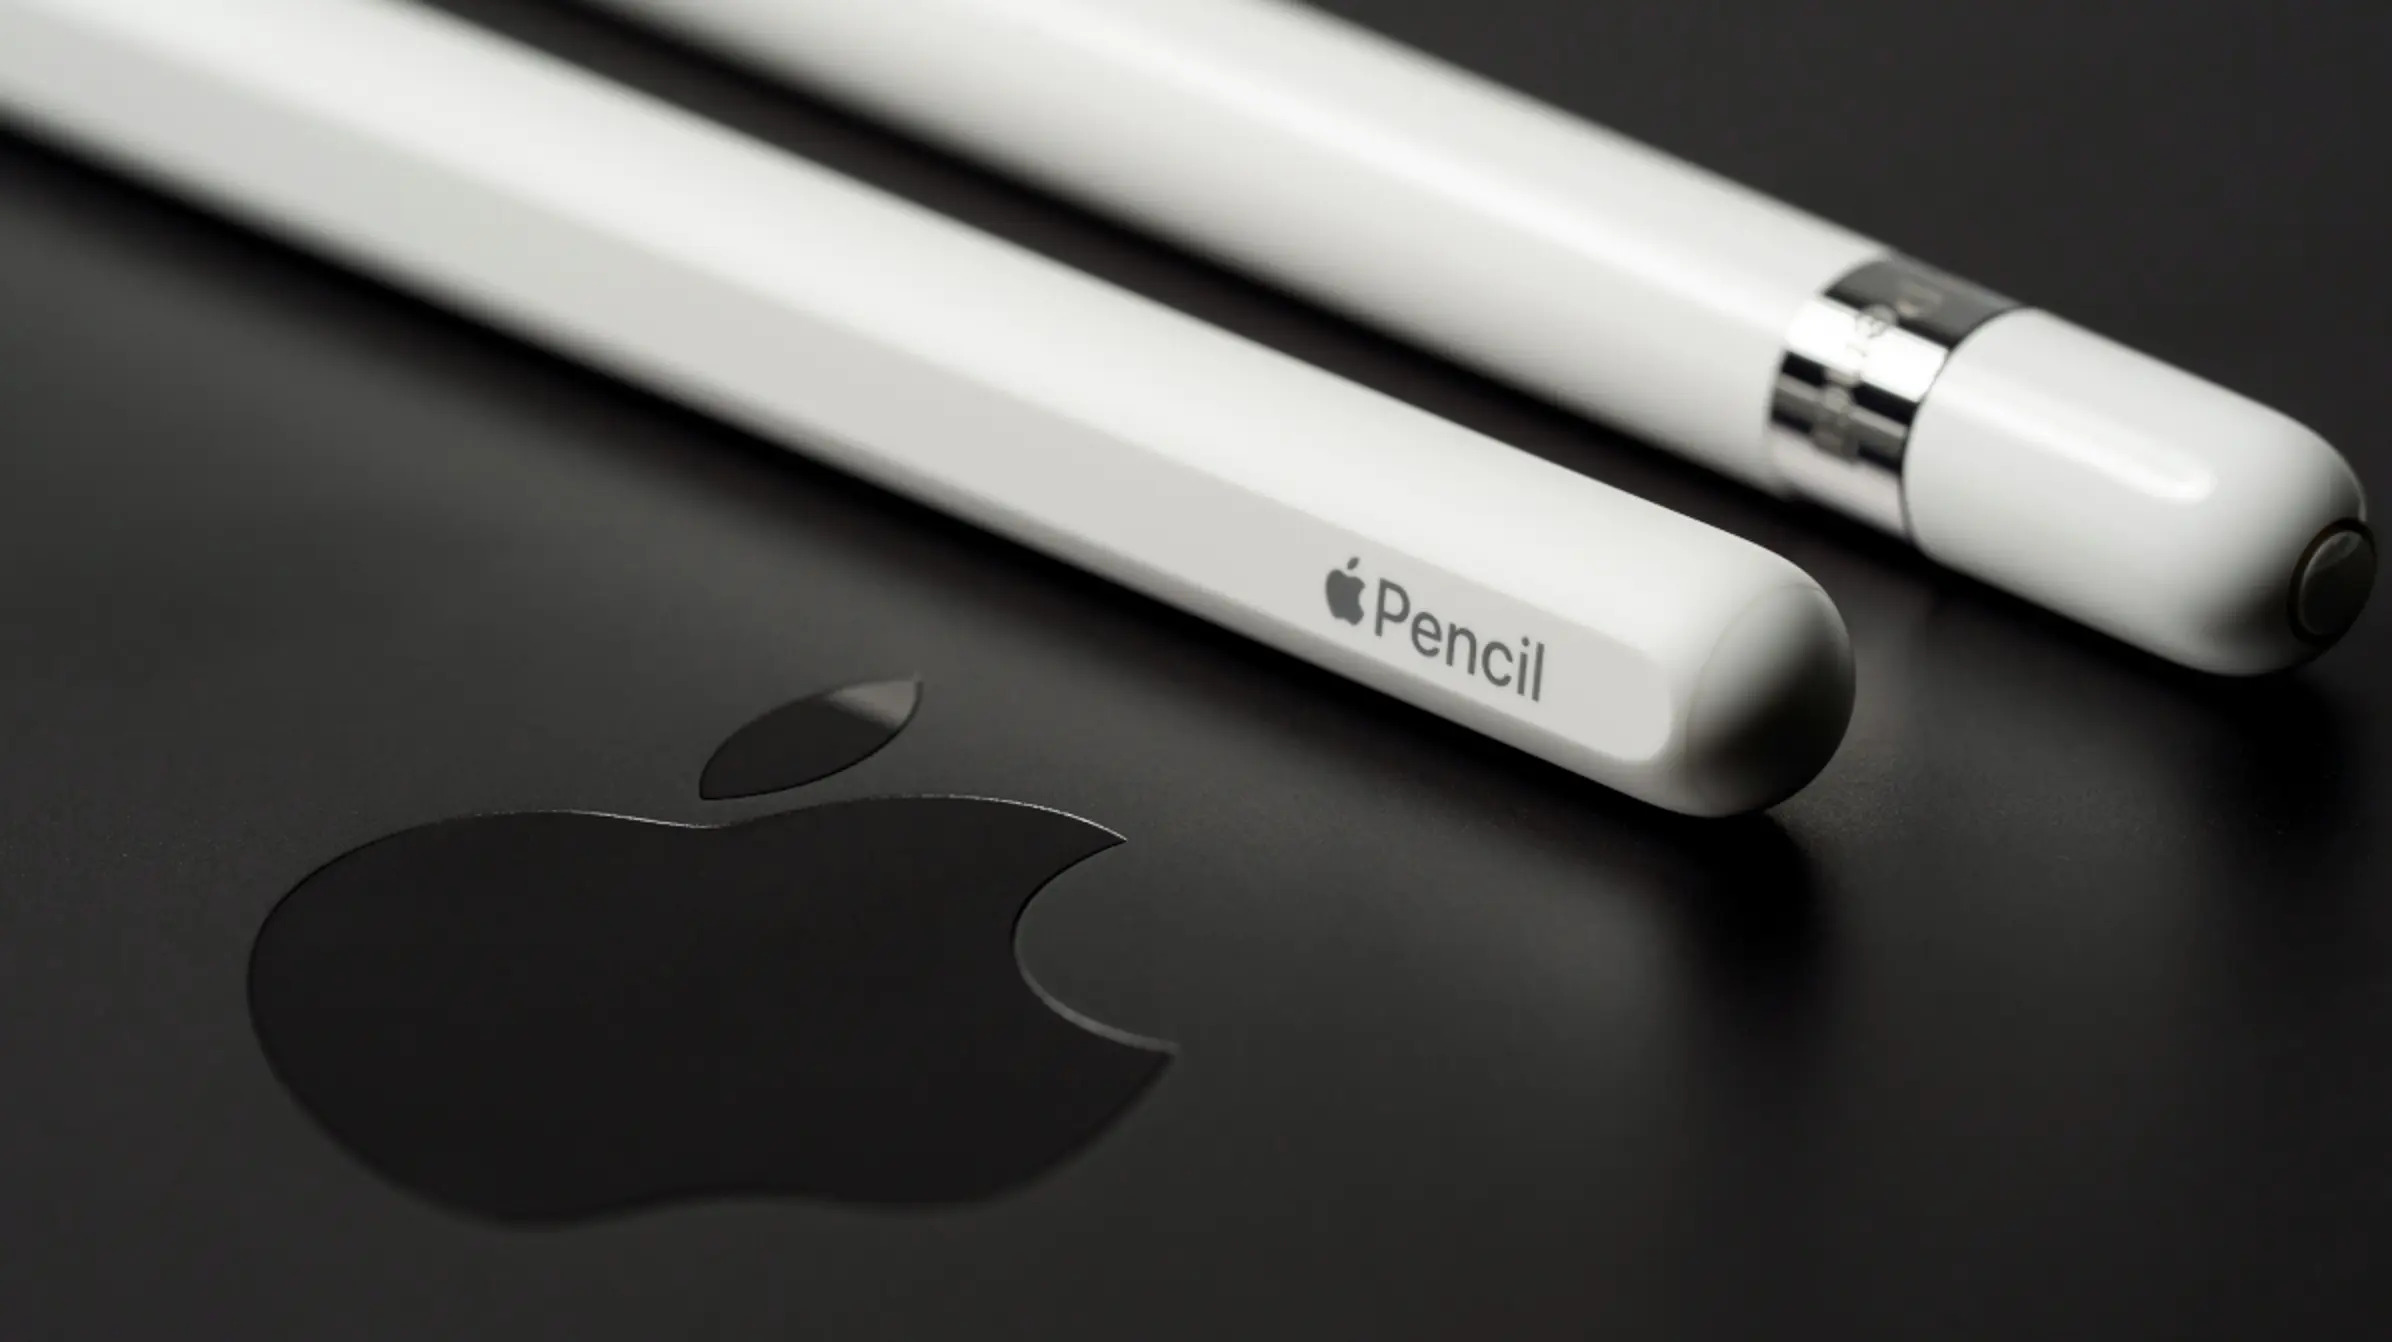 How To Connect An Apple Pencil To Your IPad